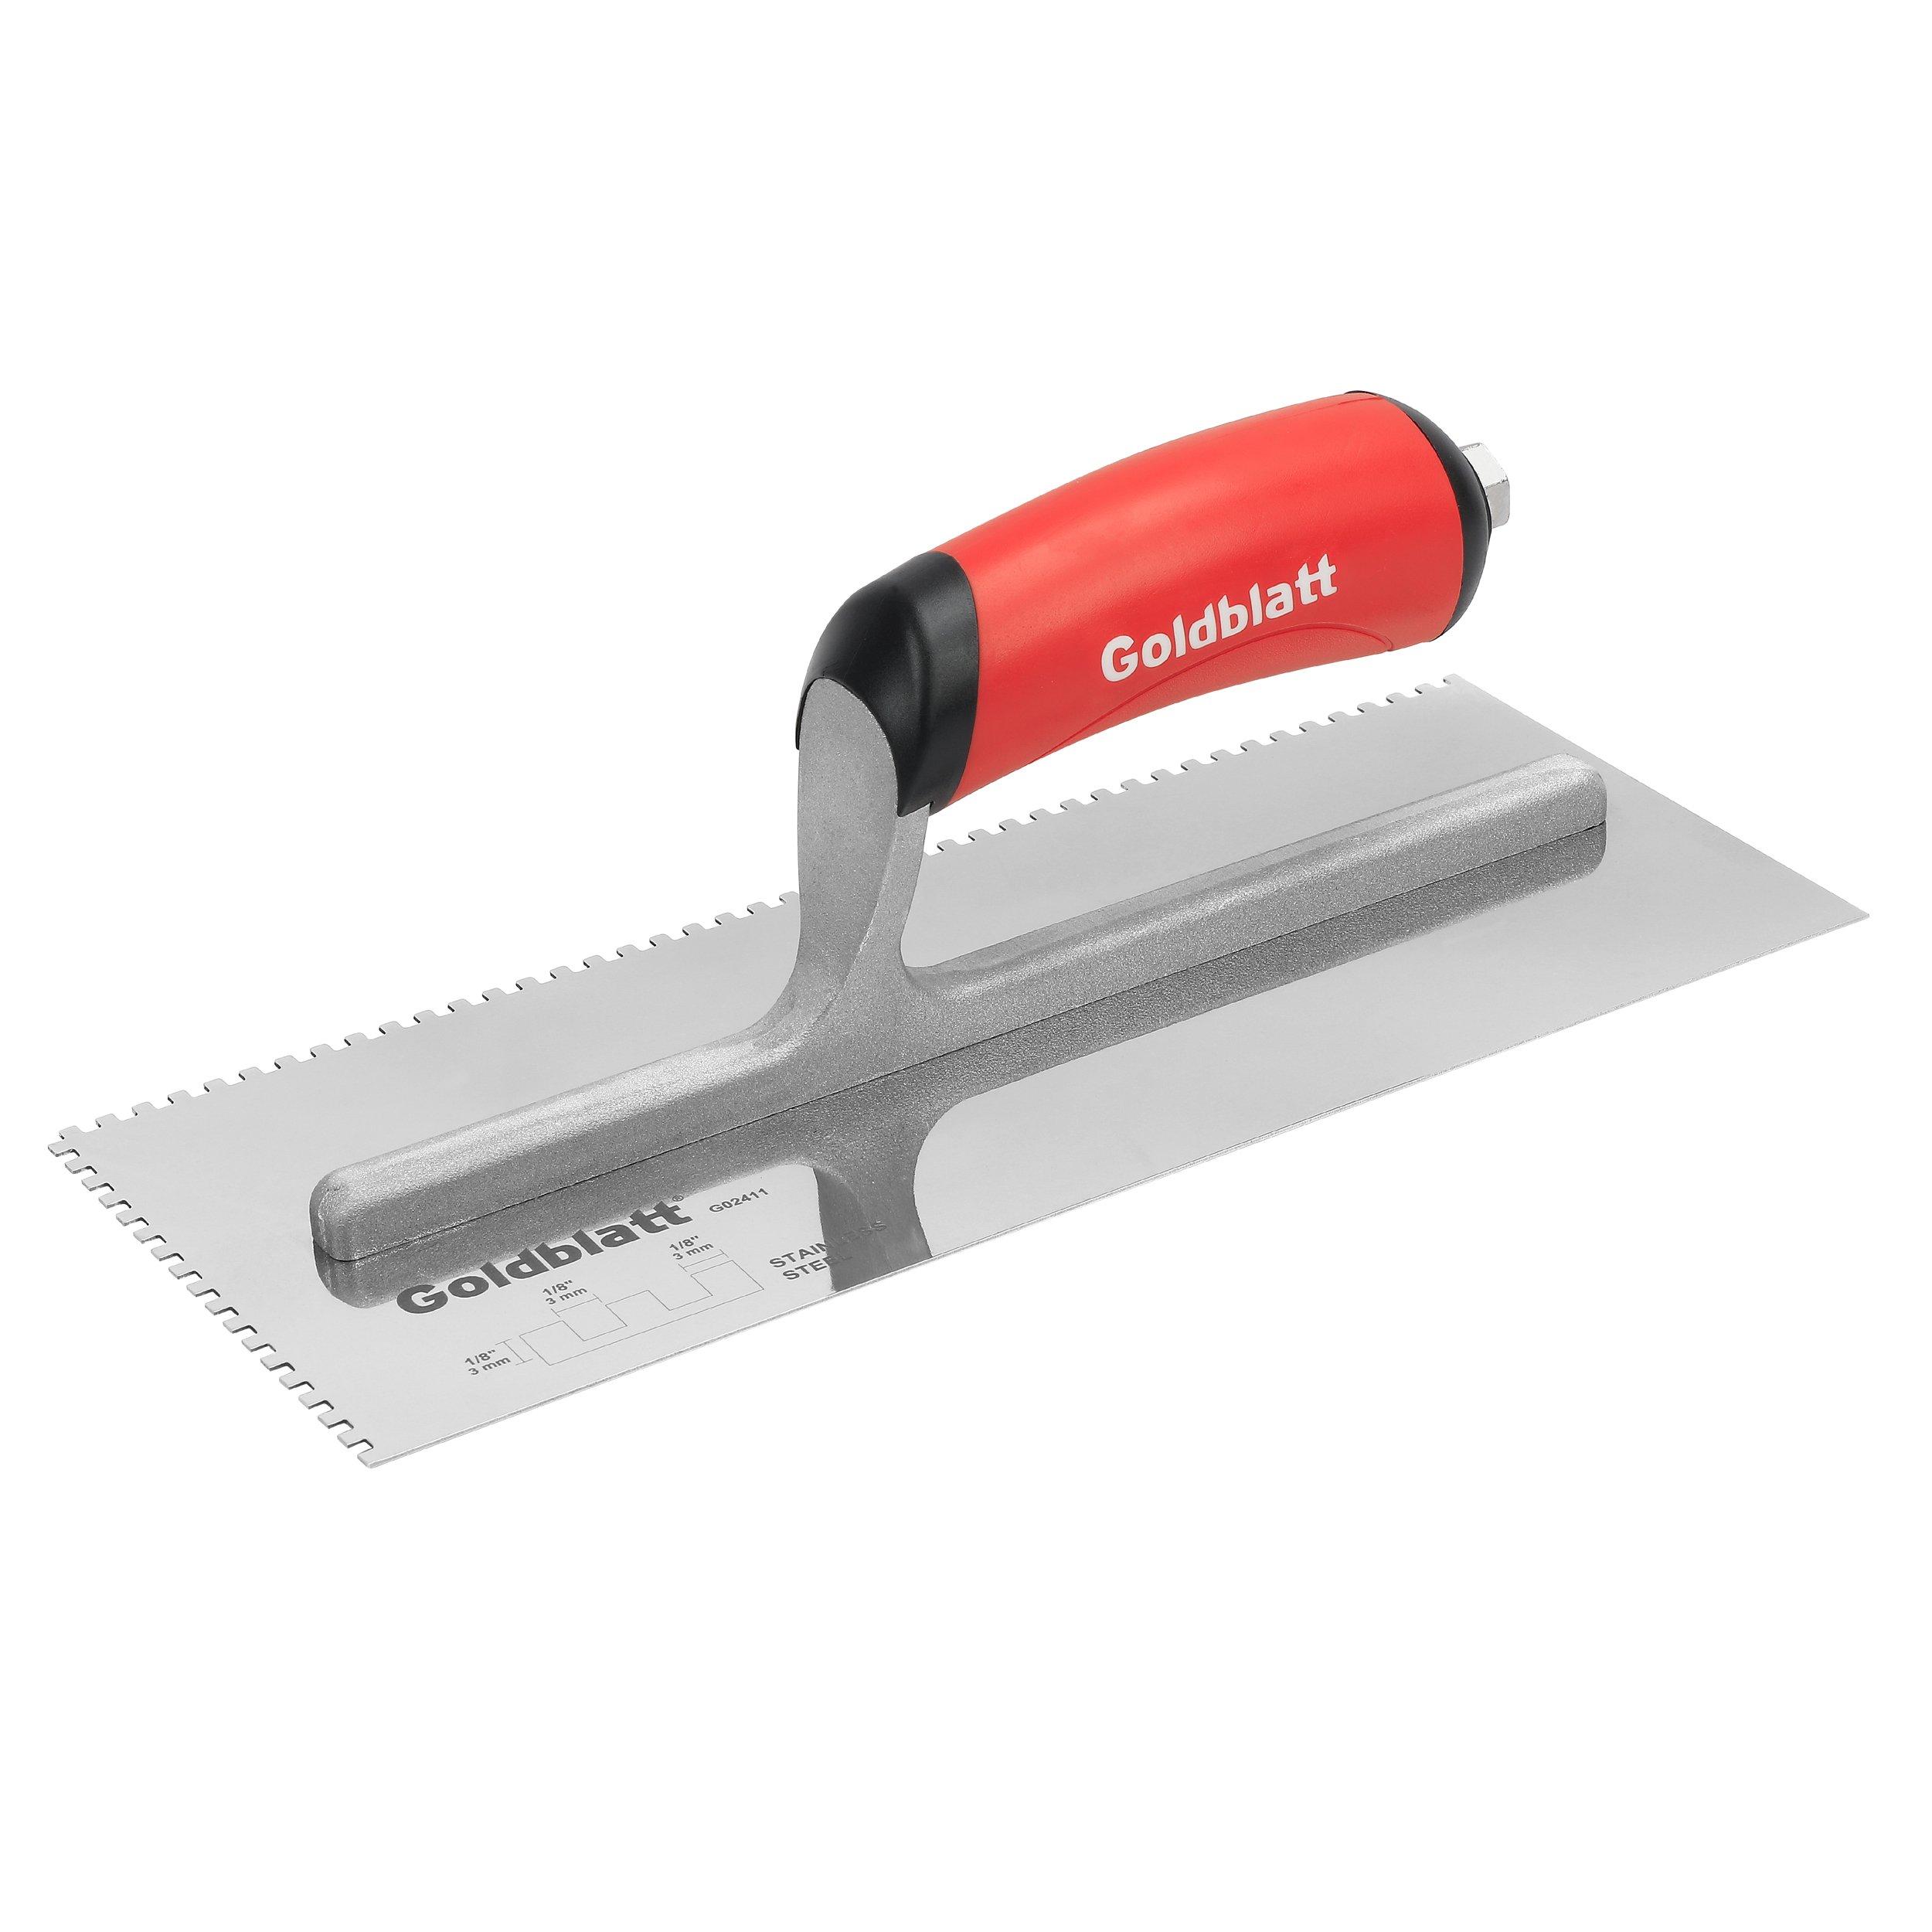 VITREX 11" Stainless Steel 4mm Square Notch/Notched Adhesive Tile Trowel,102970 